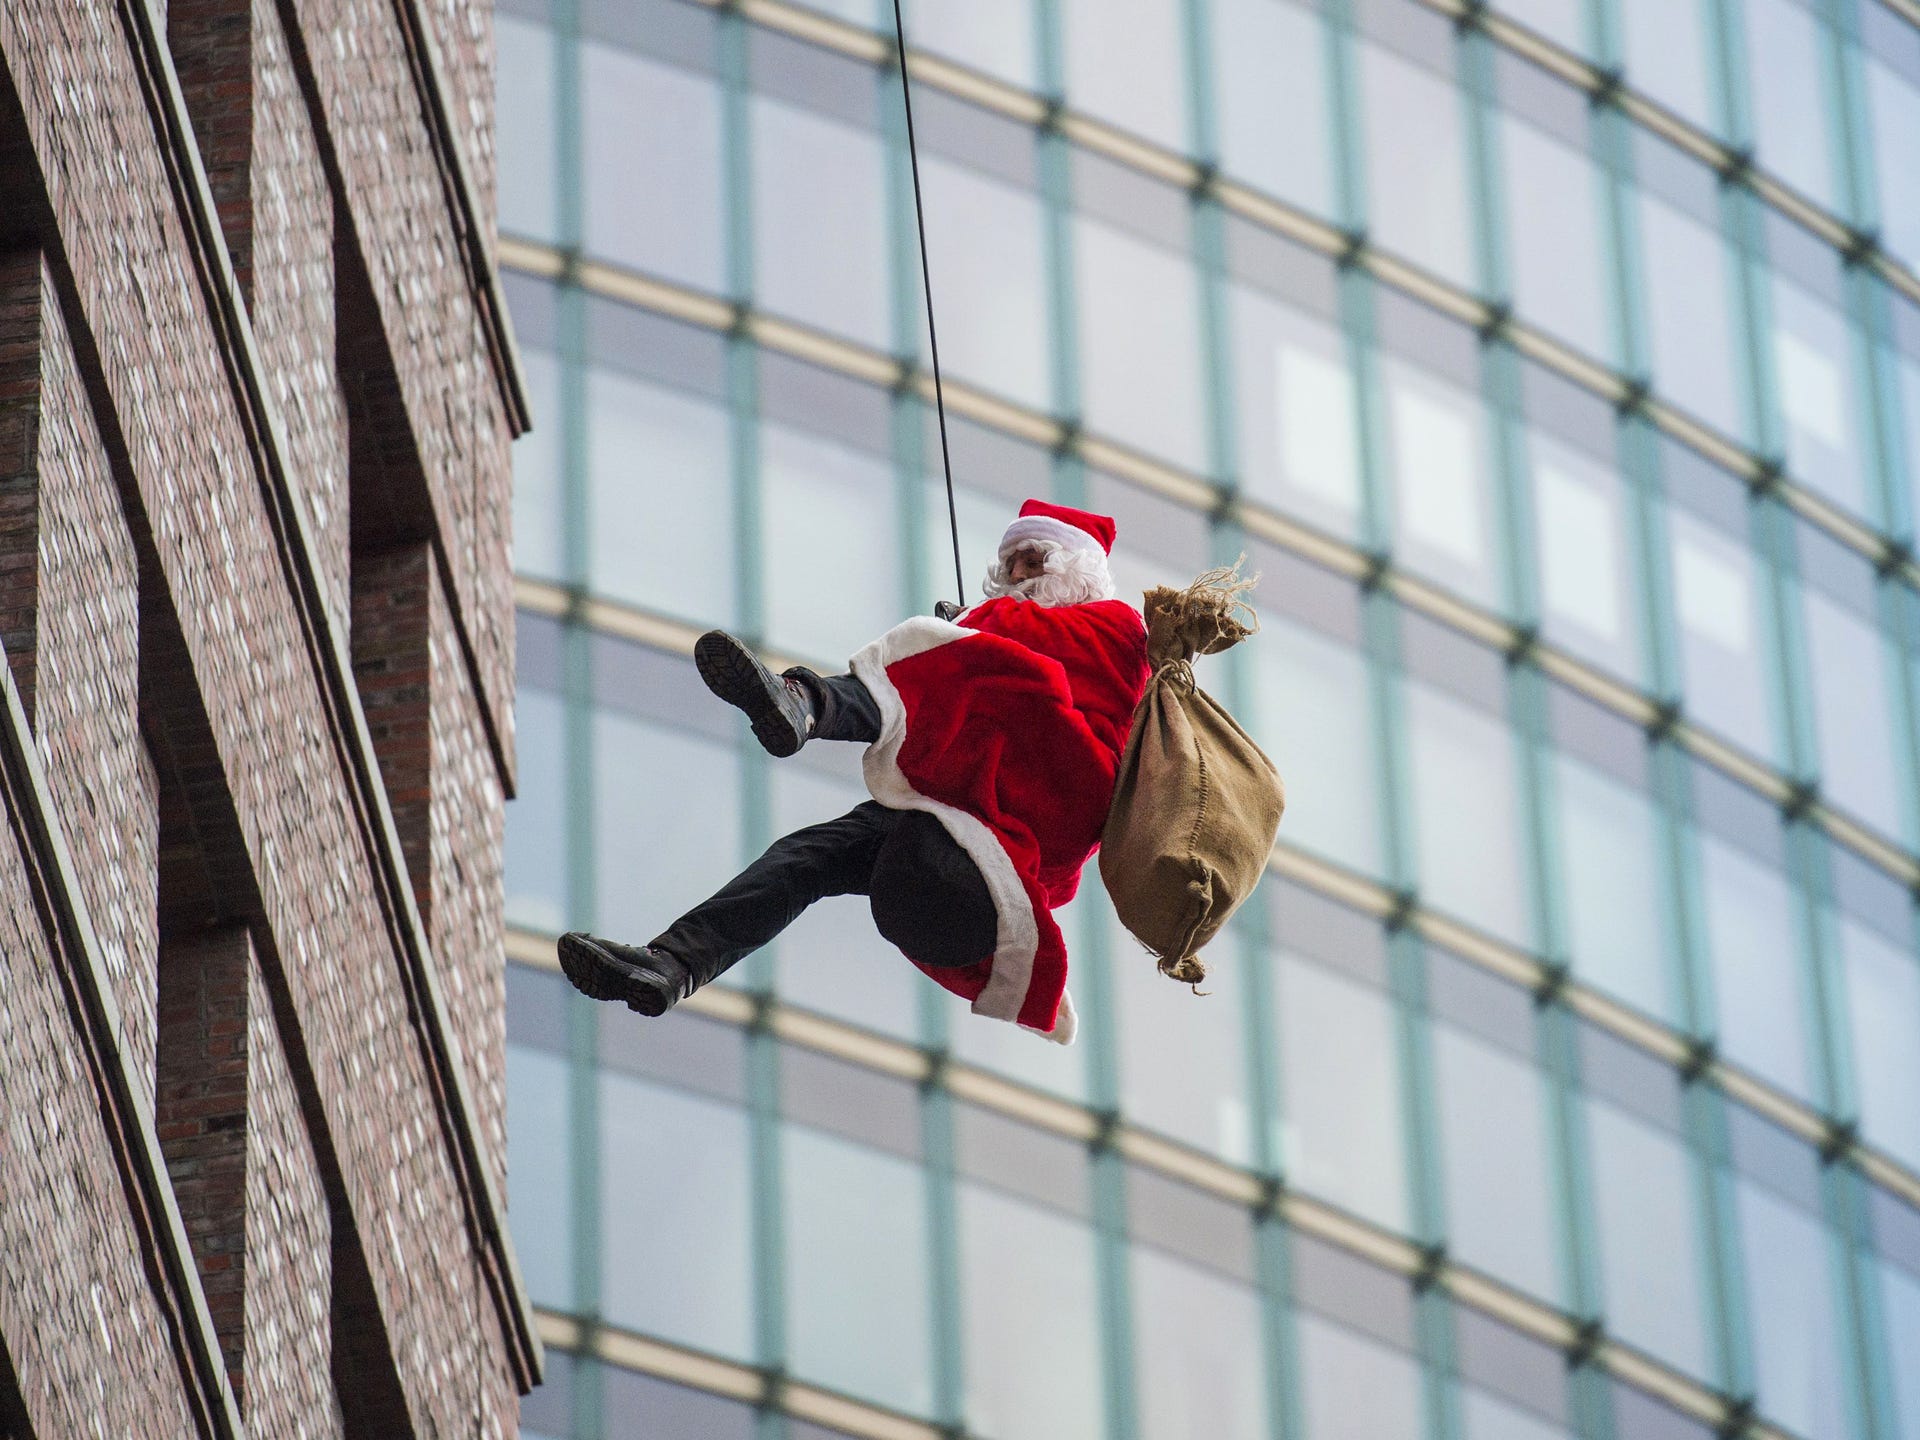 Fun and festive Santas from around the world